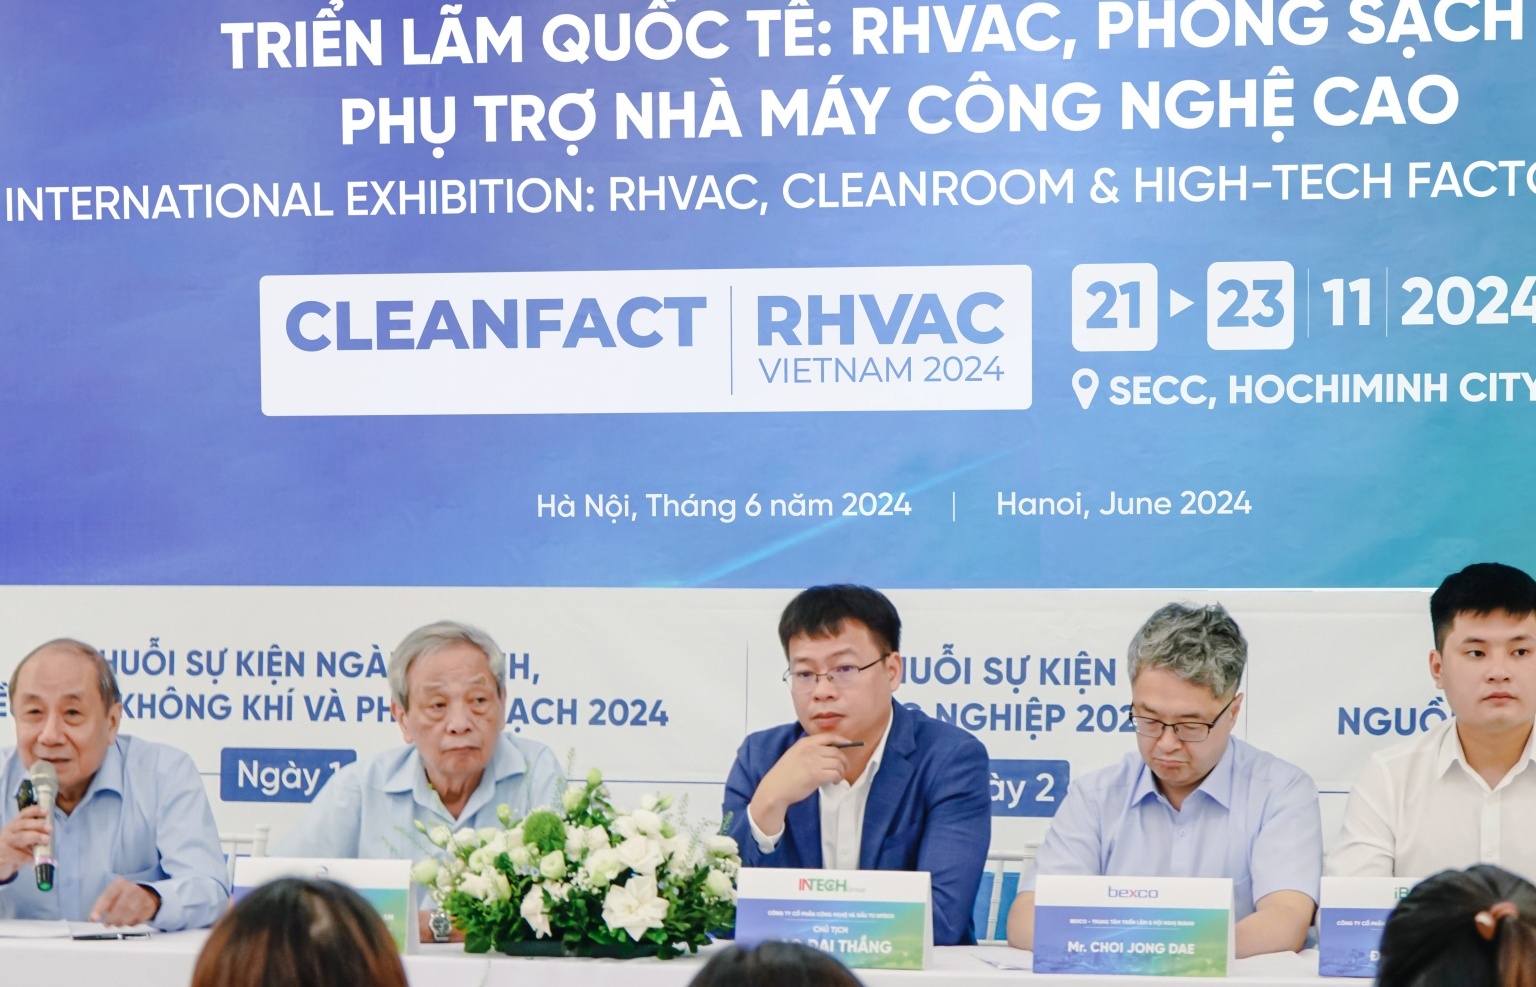 Cleanfact & RHVAC expo to showcase latest air con and refrigeration technology